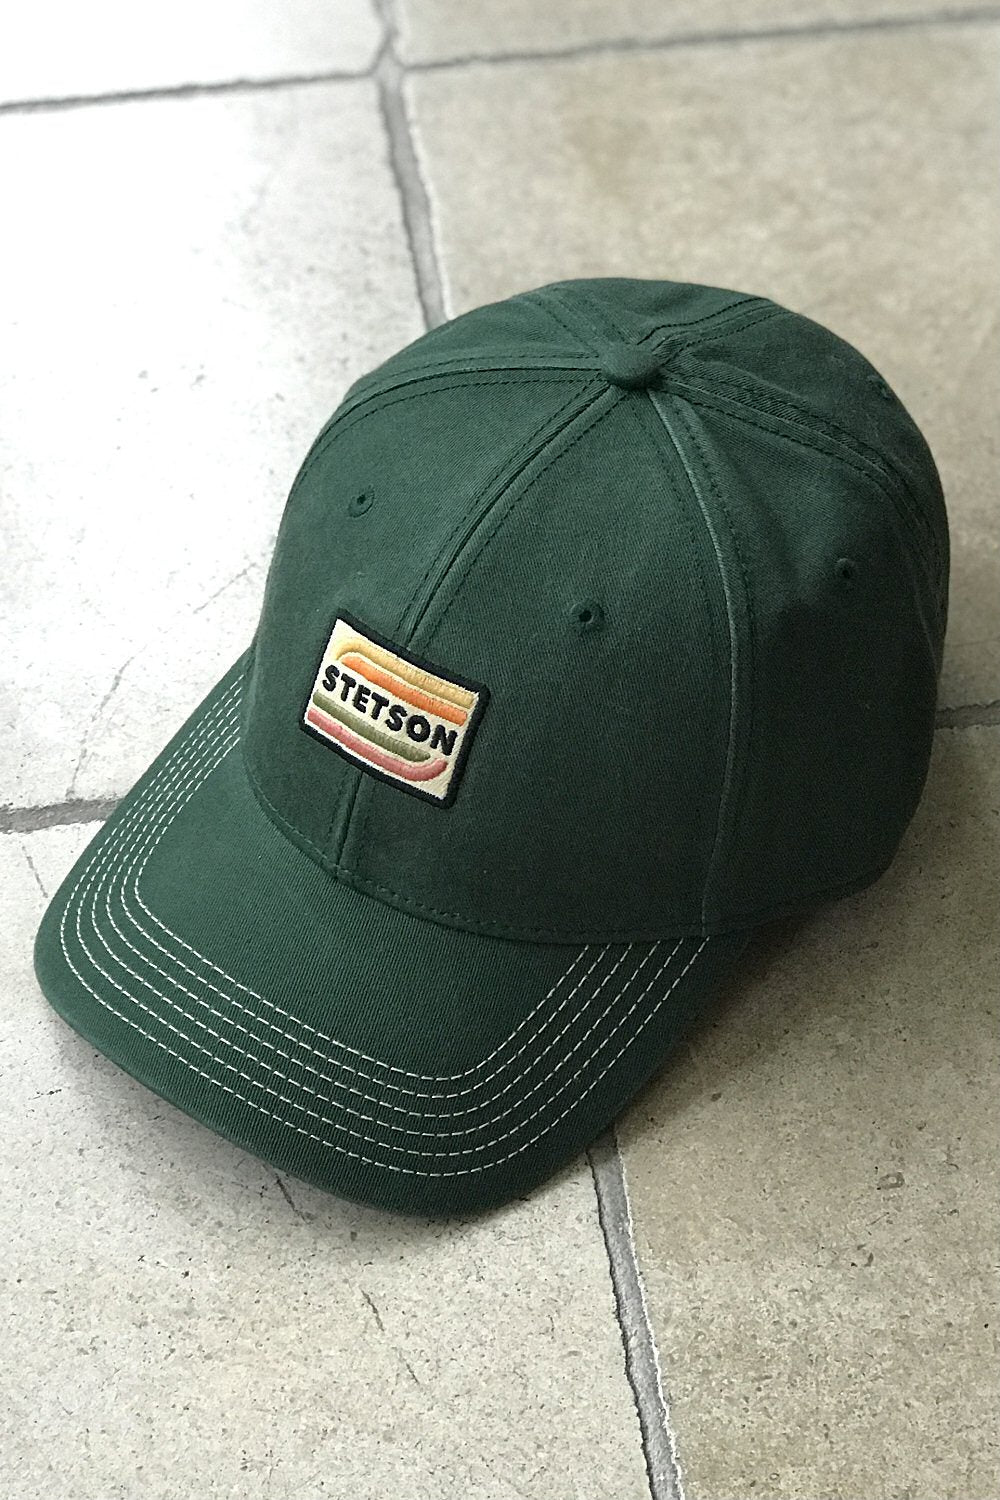 Stetson baseball cap used forest green